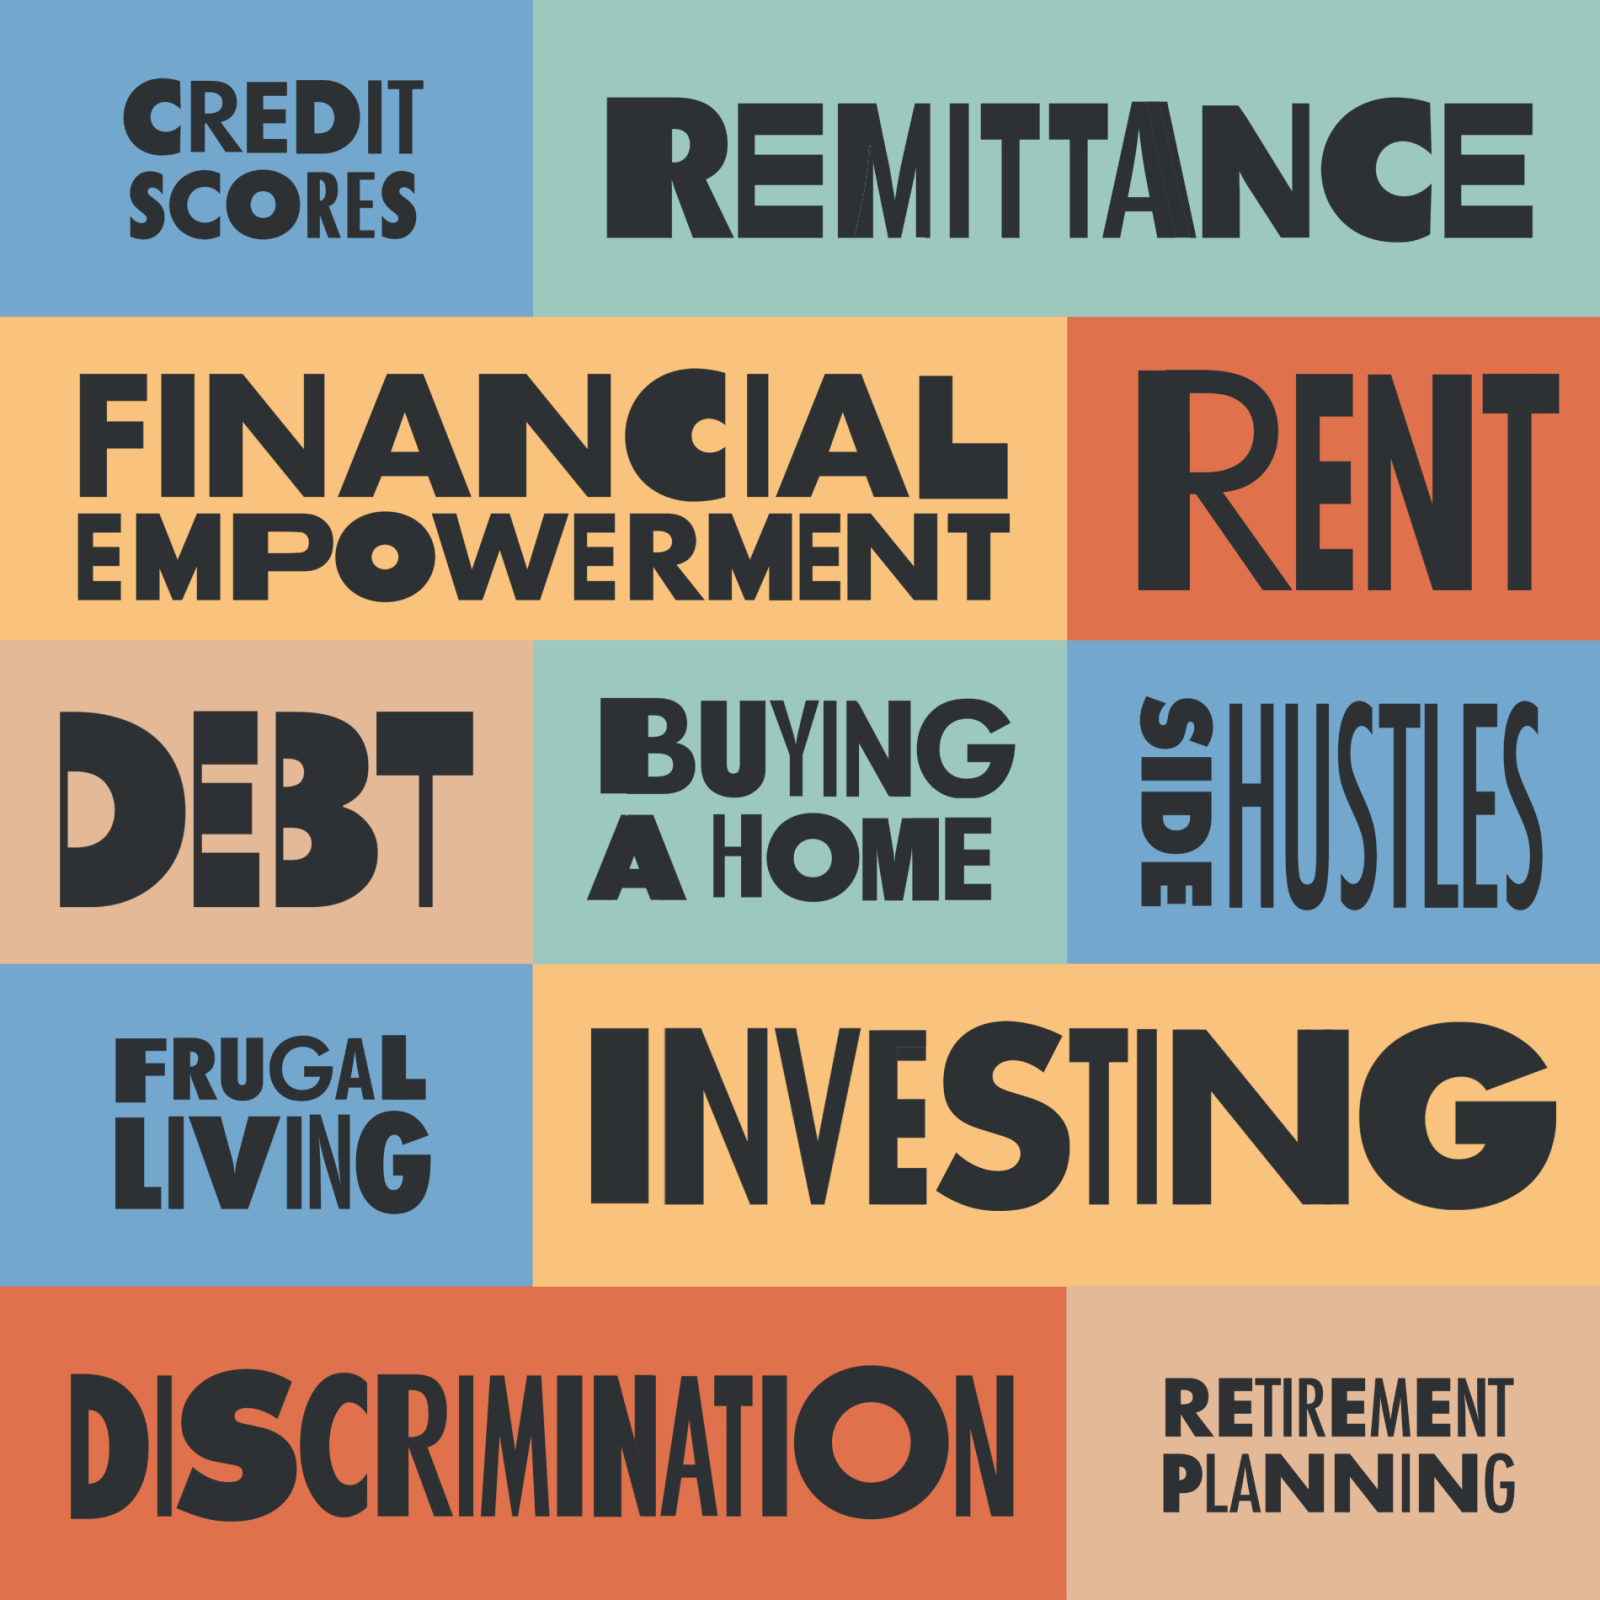 Typographic image of personal finance terms